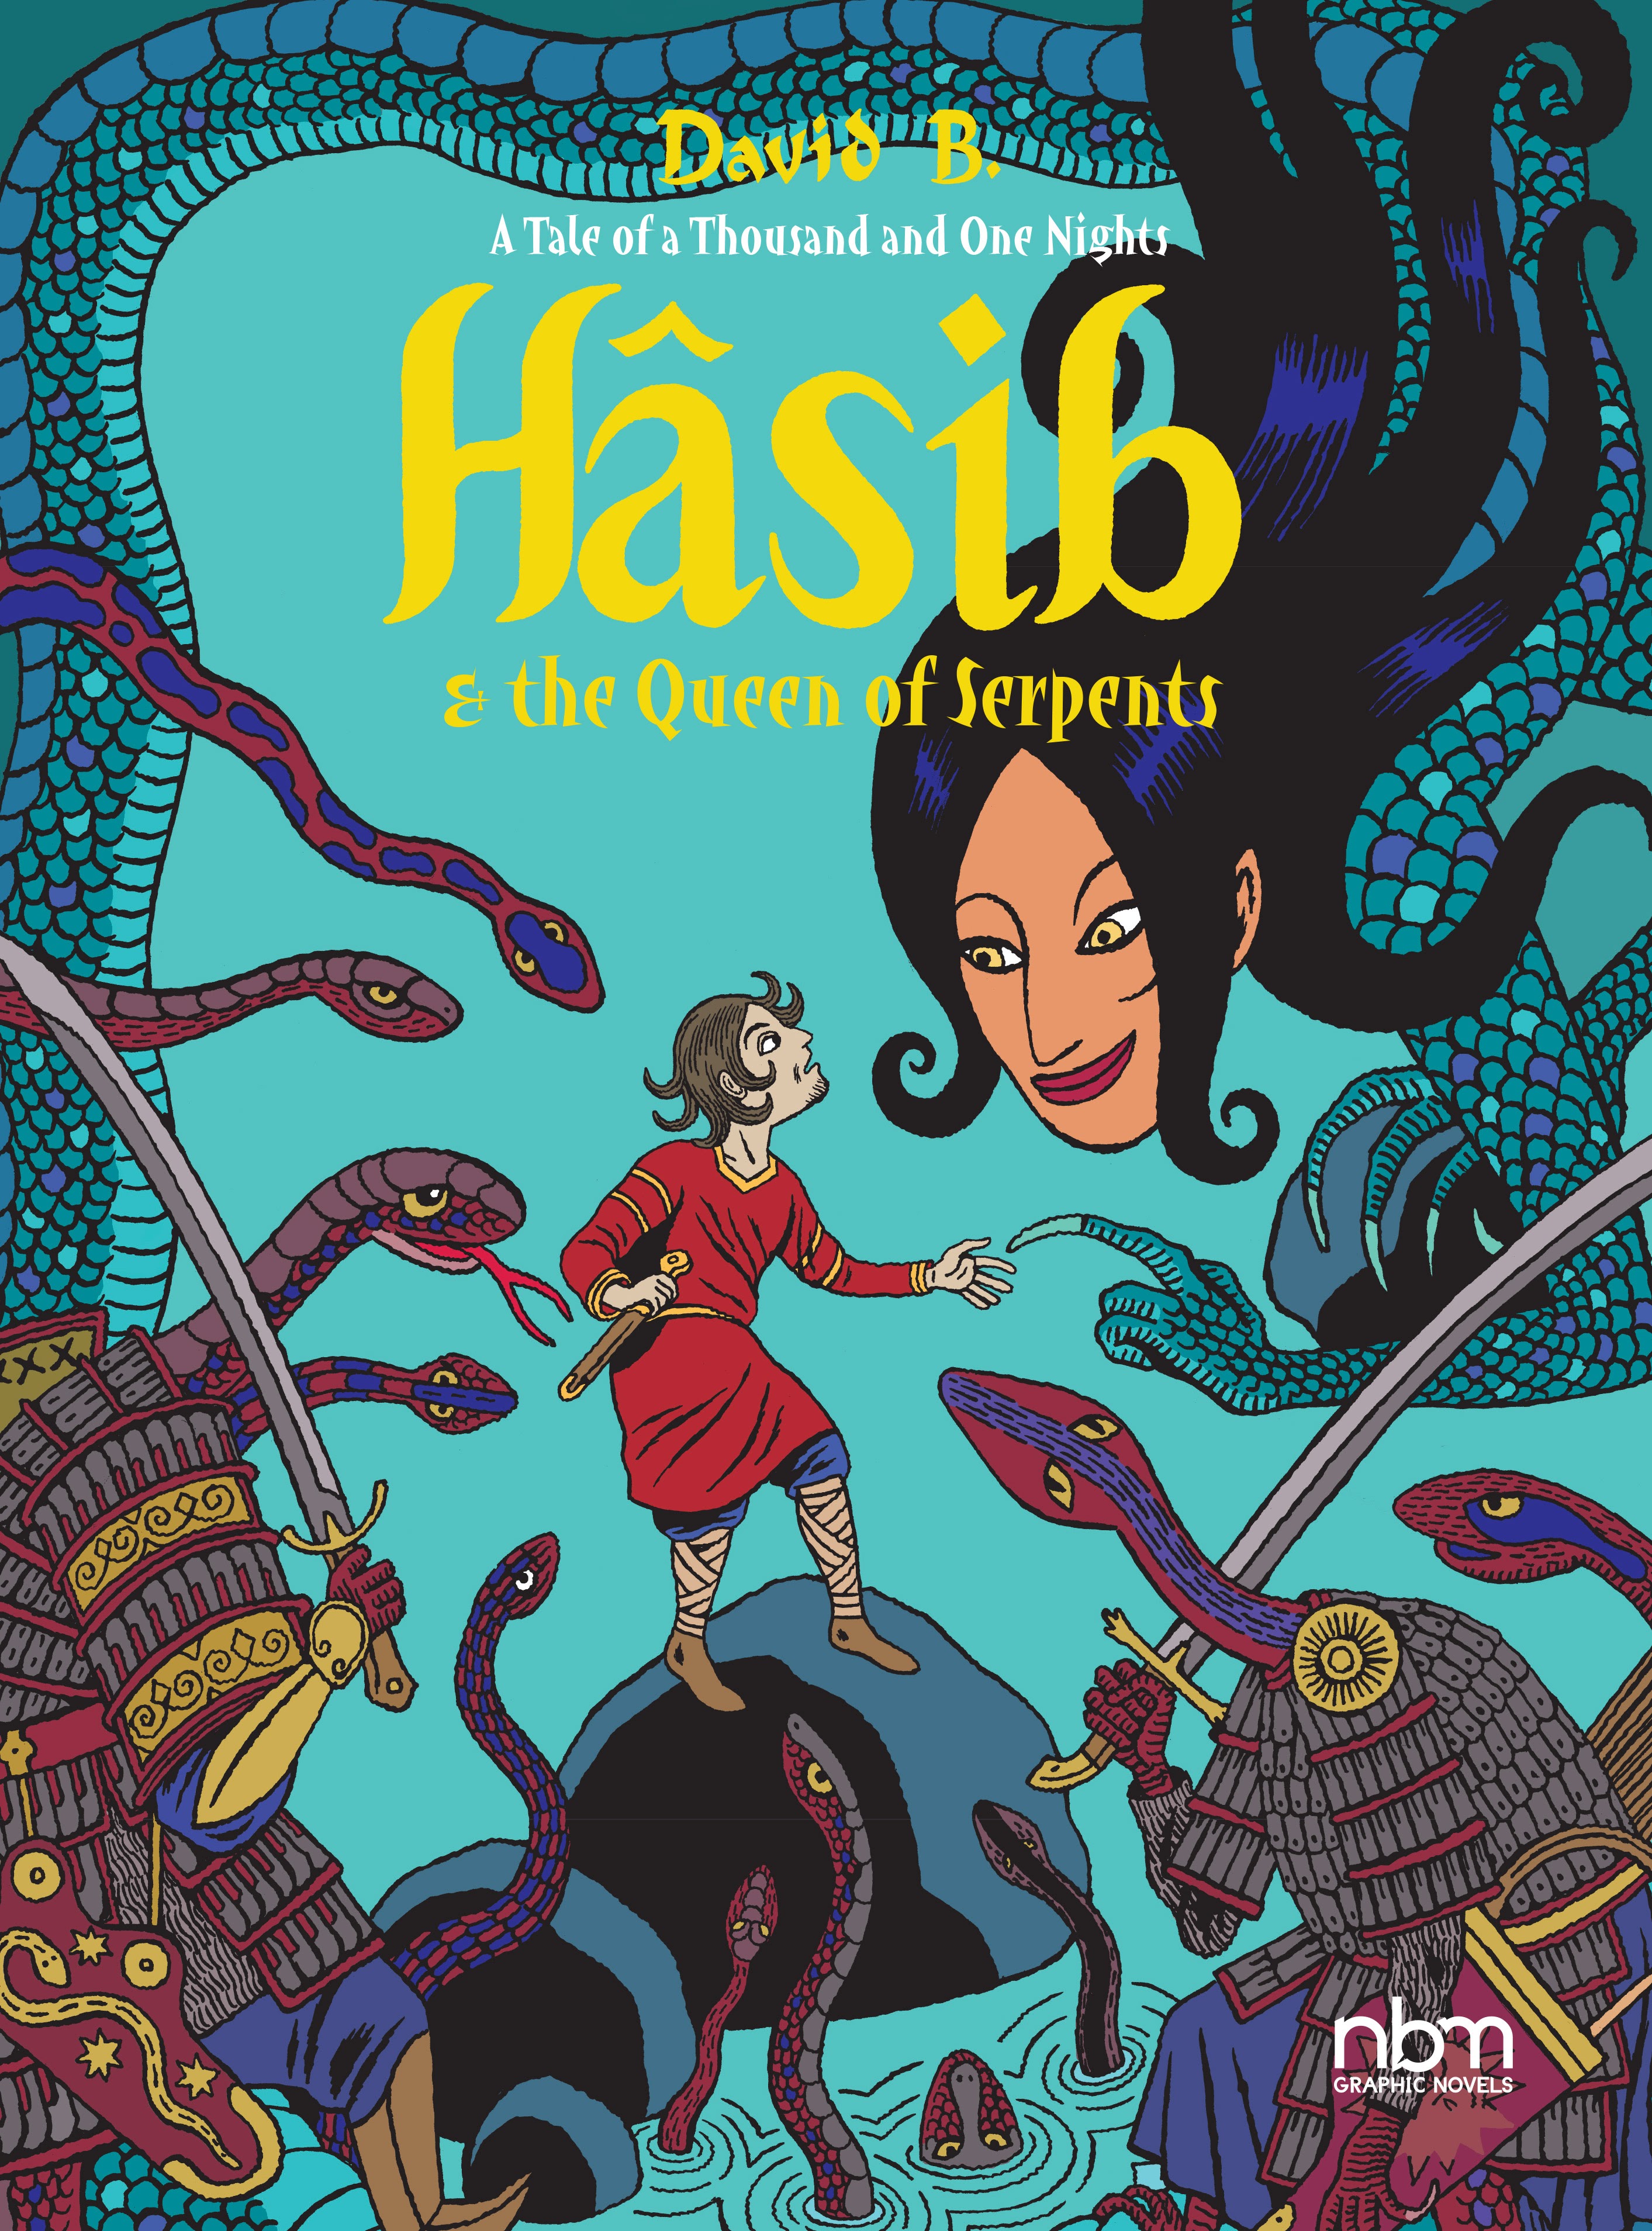 Read online A Tale of a Thousand and One Nights: HASIB & the Queen of Serpents comic -  Issue # TPB - 1